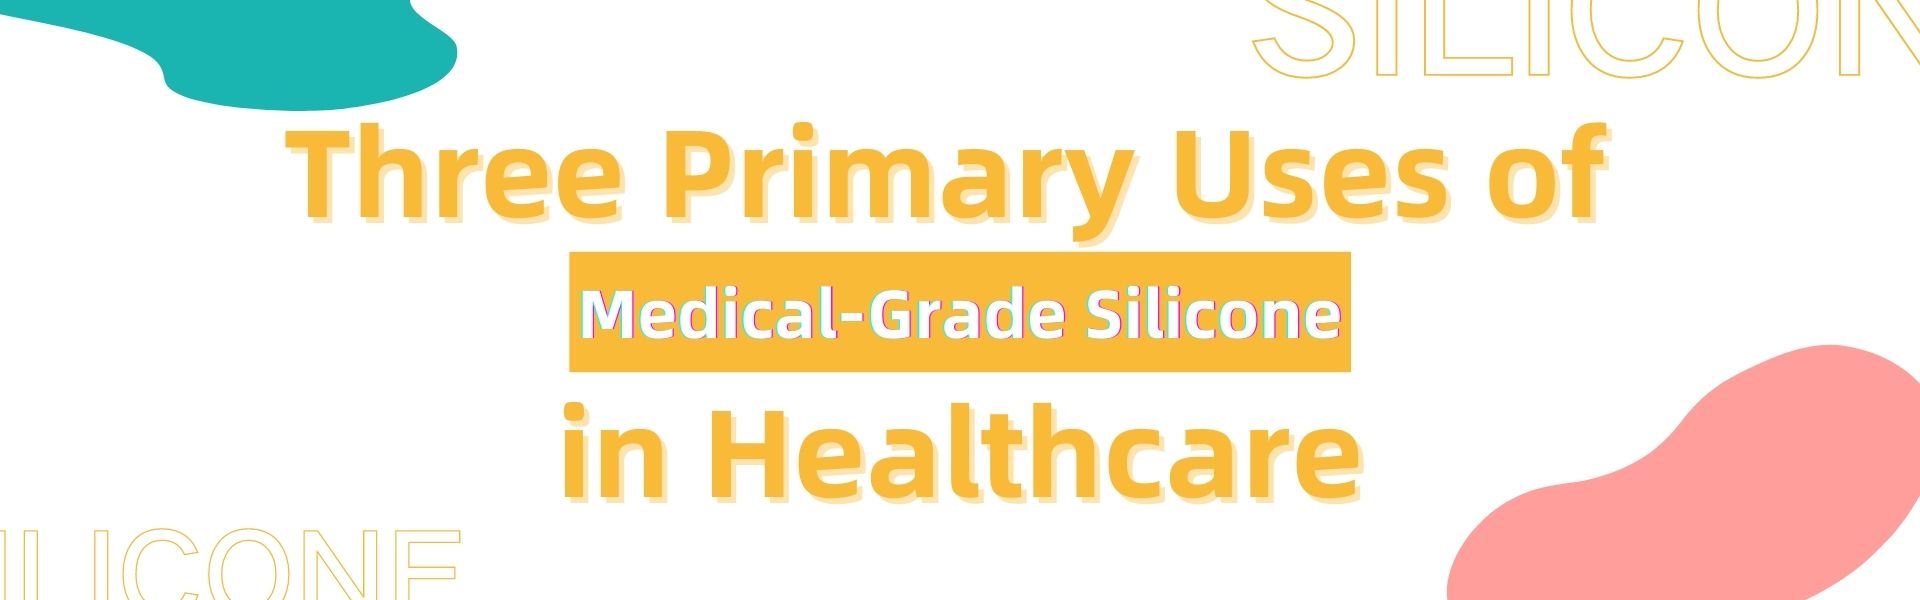 3 Primary Uses of Medical-Grade Silicone in Healthcare